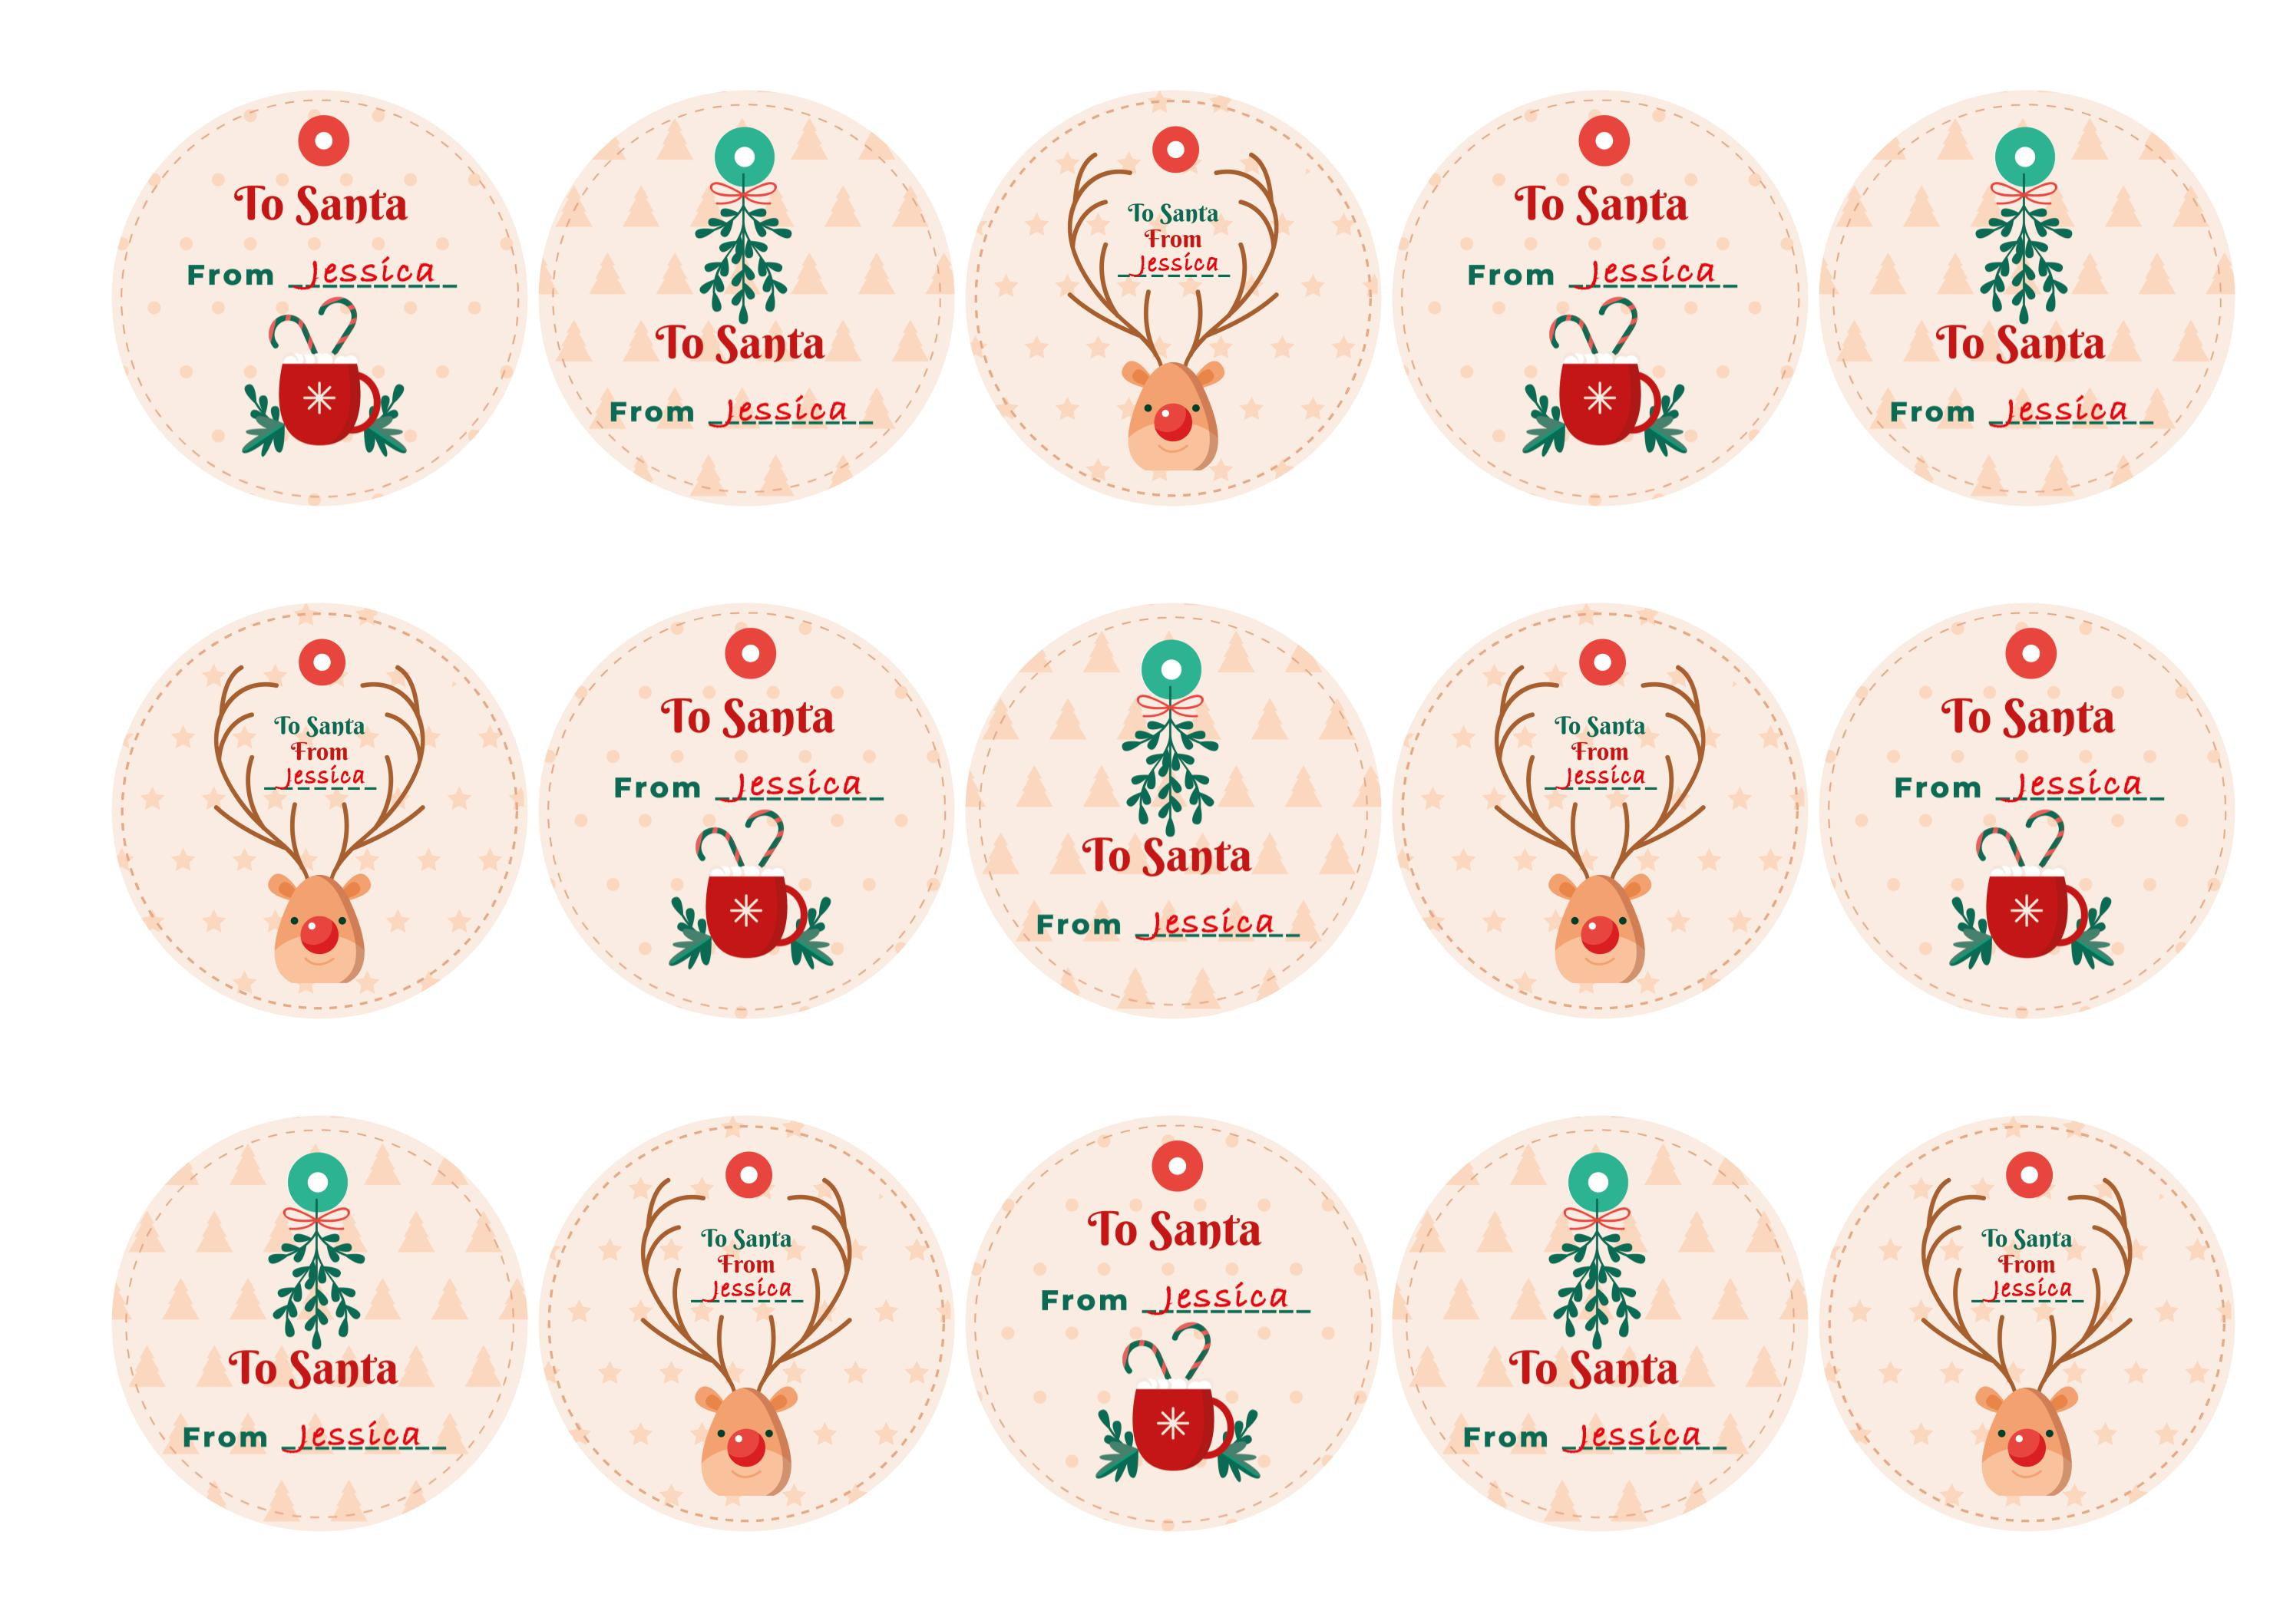 Personalised cupcake toppers with Christmas Eve designs